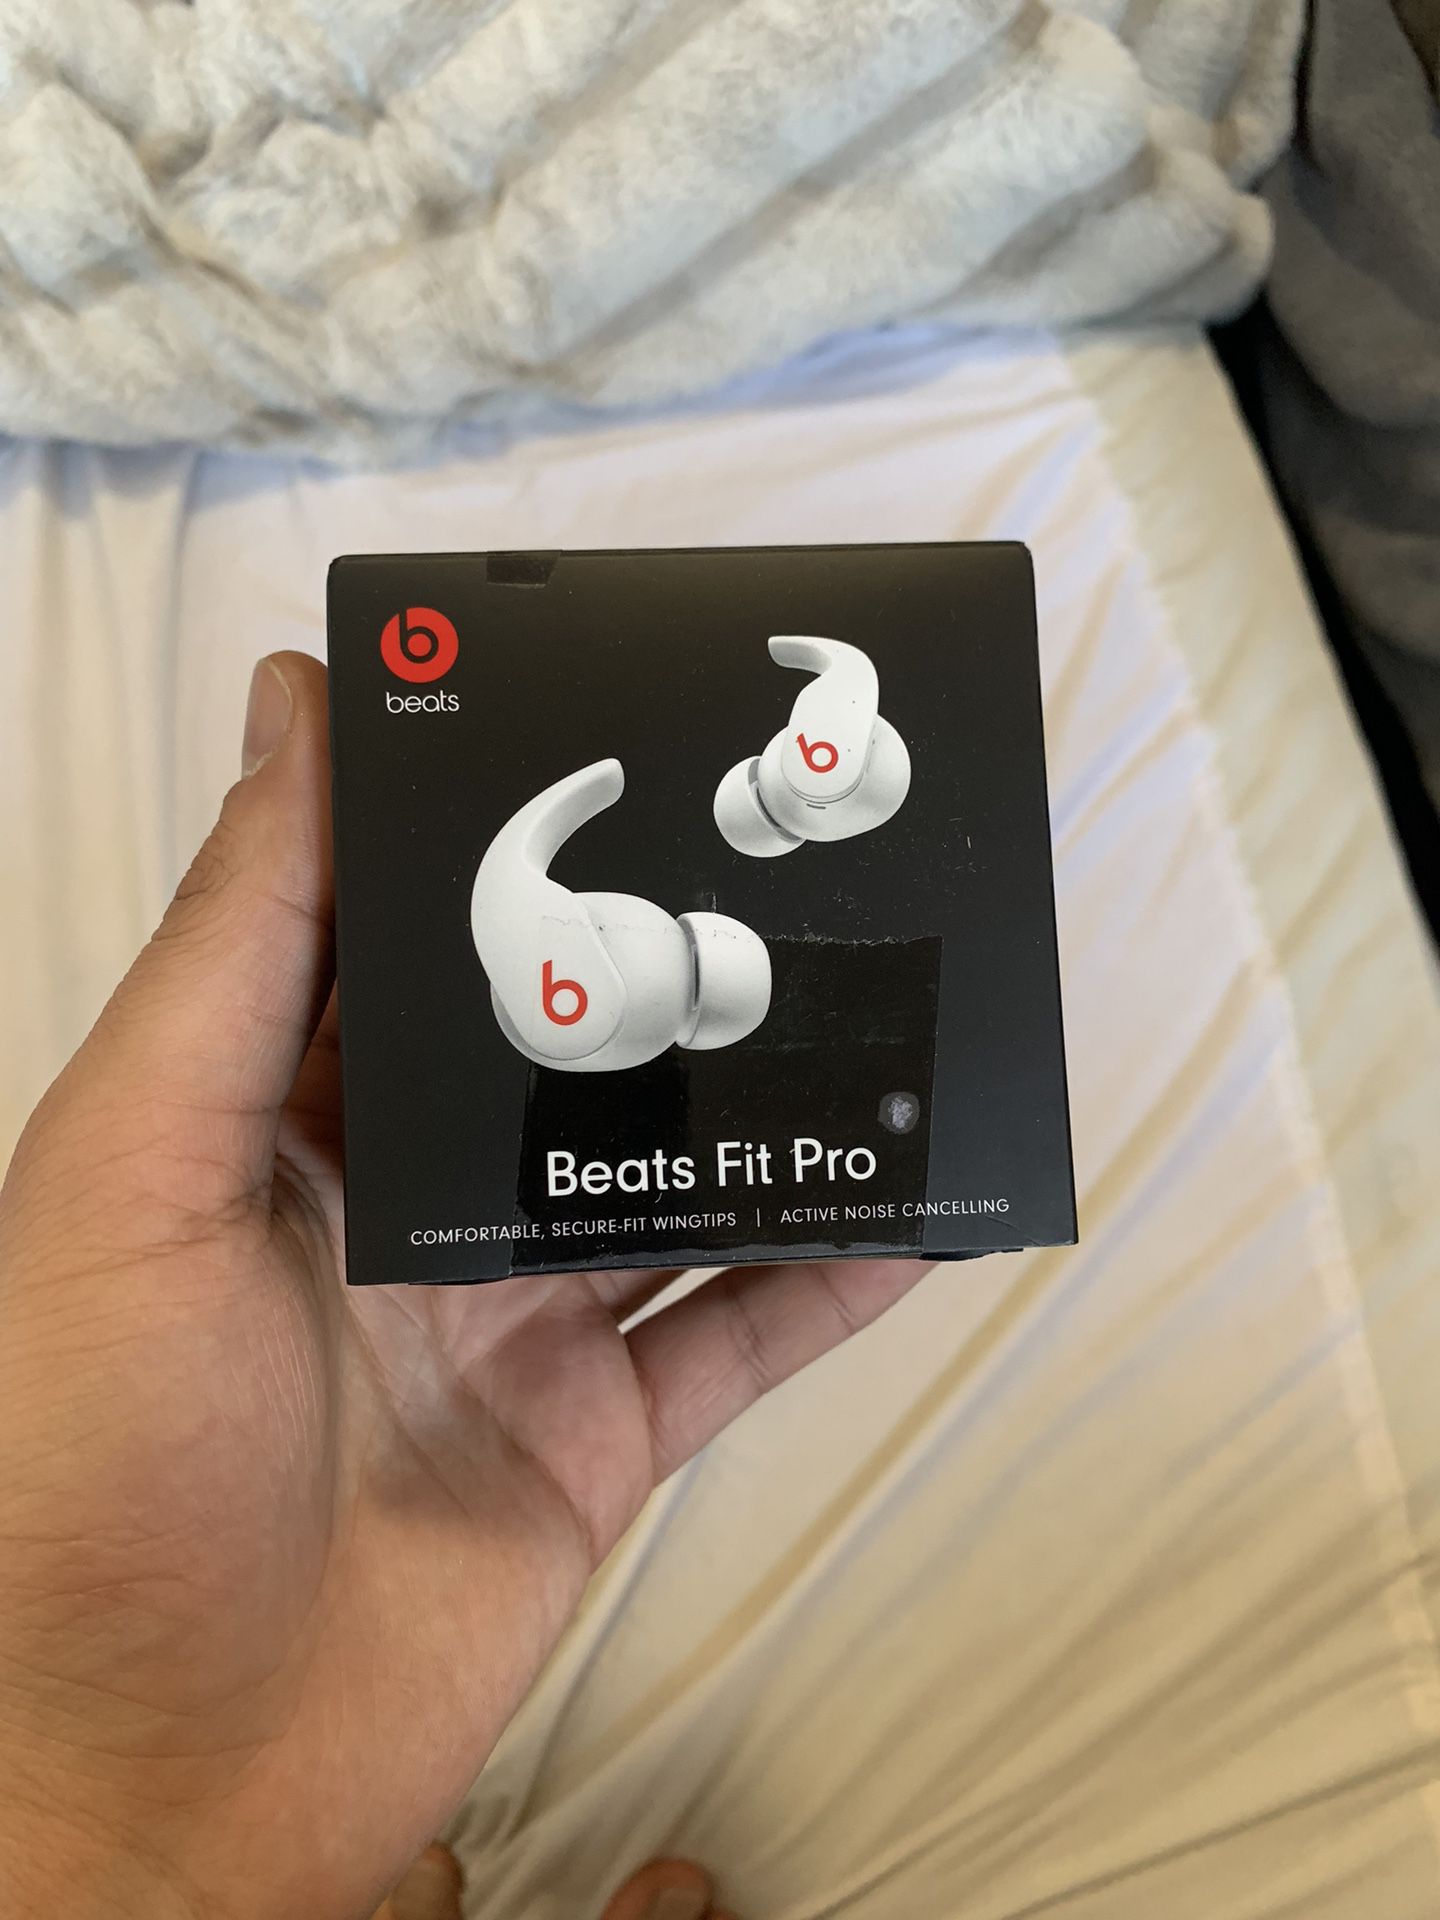 Beats by Dr. Dre Fit Pro Noise Cancelling Earbuds - White